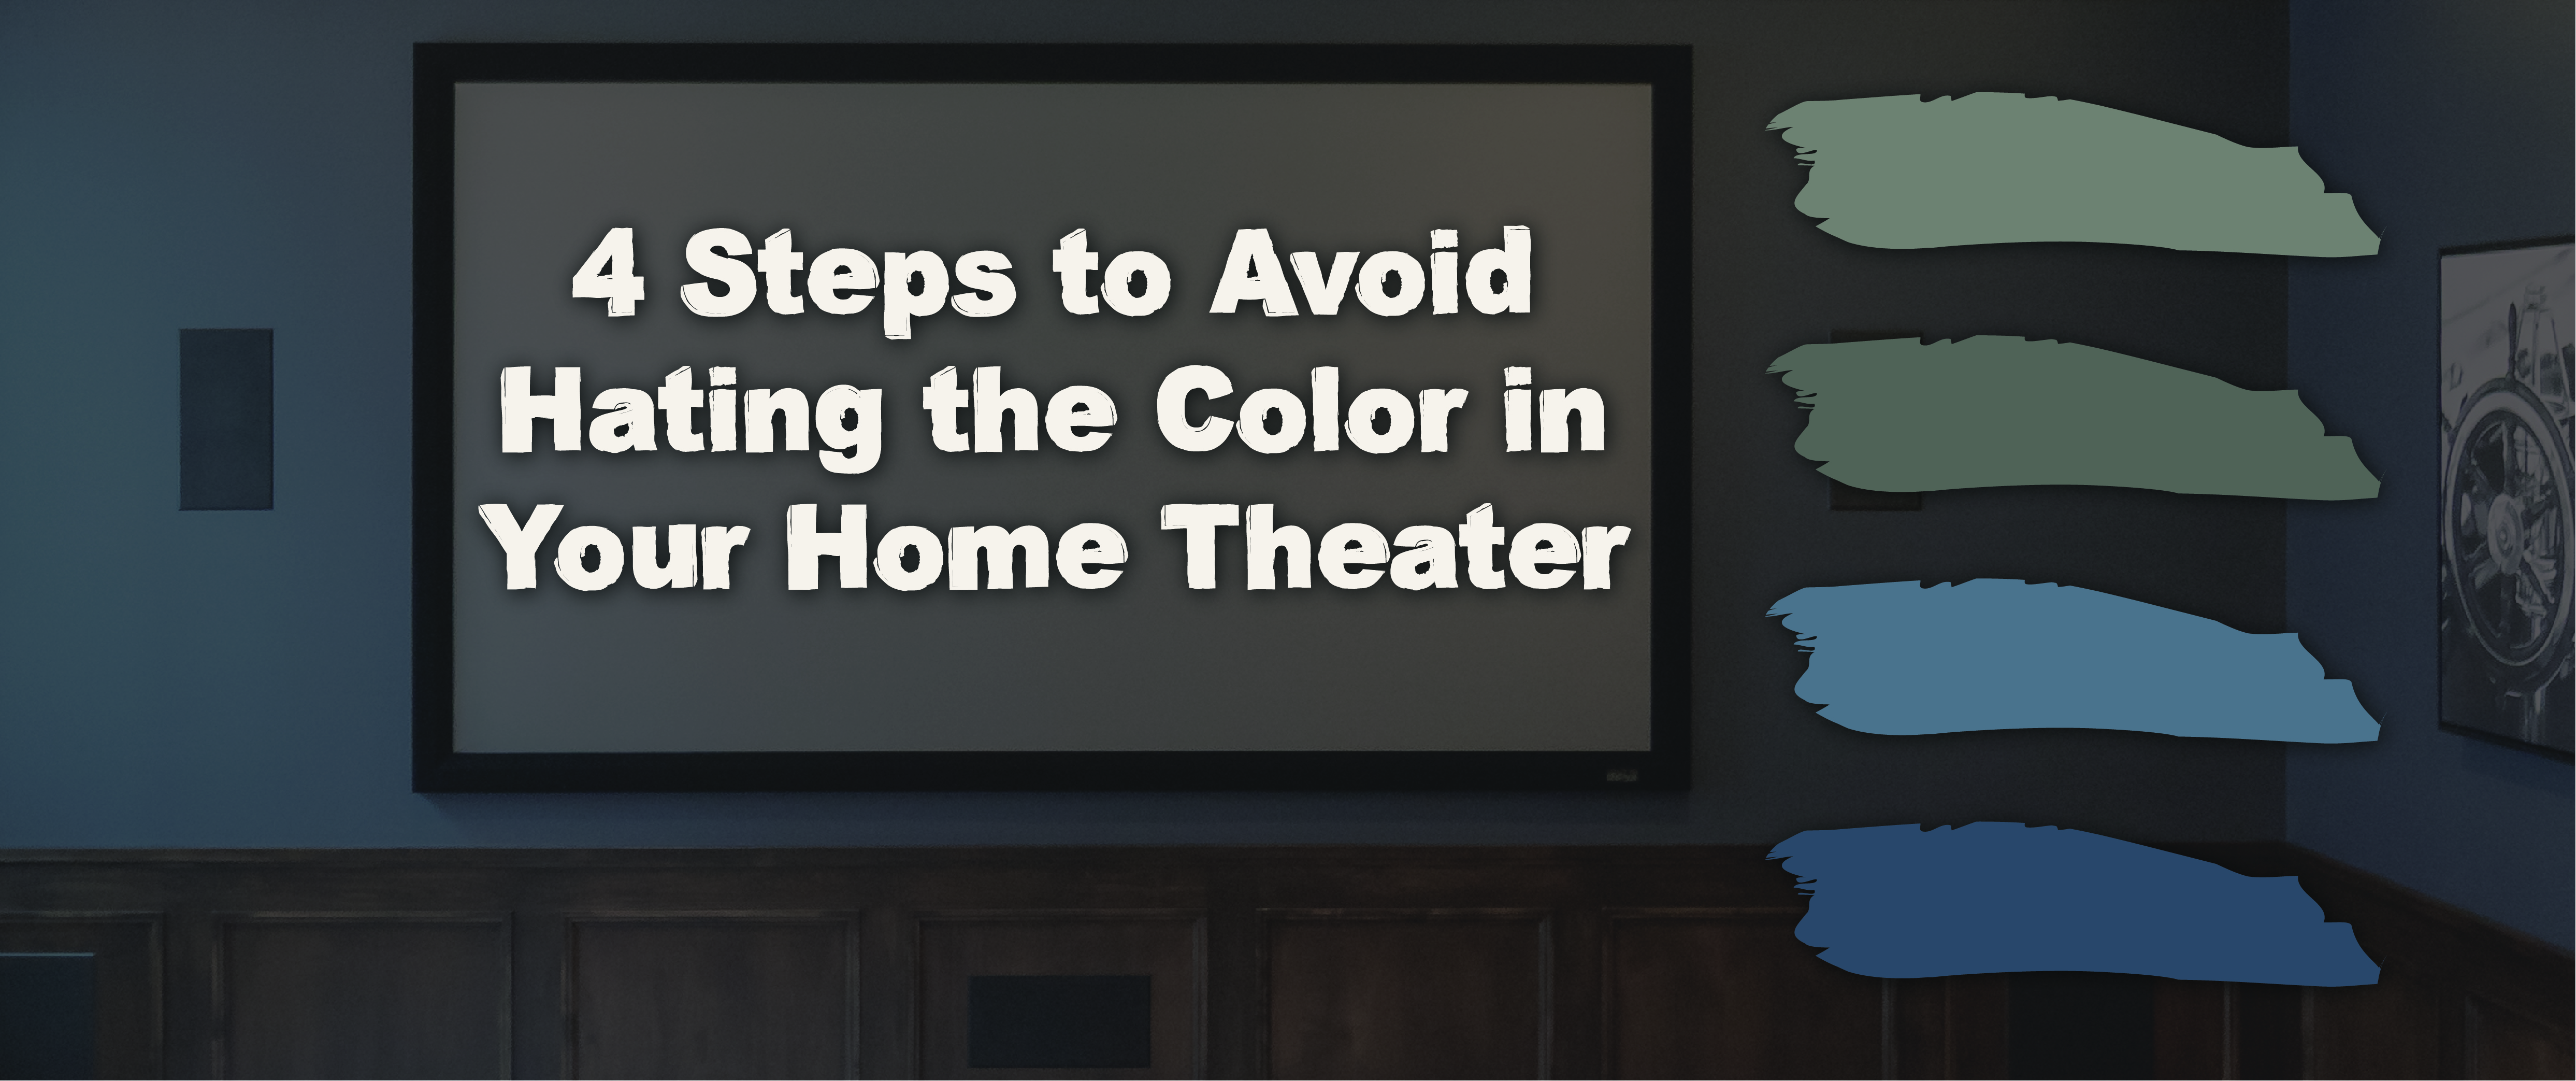 4 Steps to Avoid Hating the Color in Your Home Theater